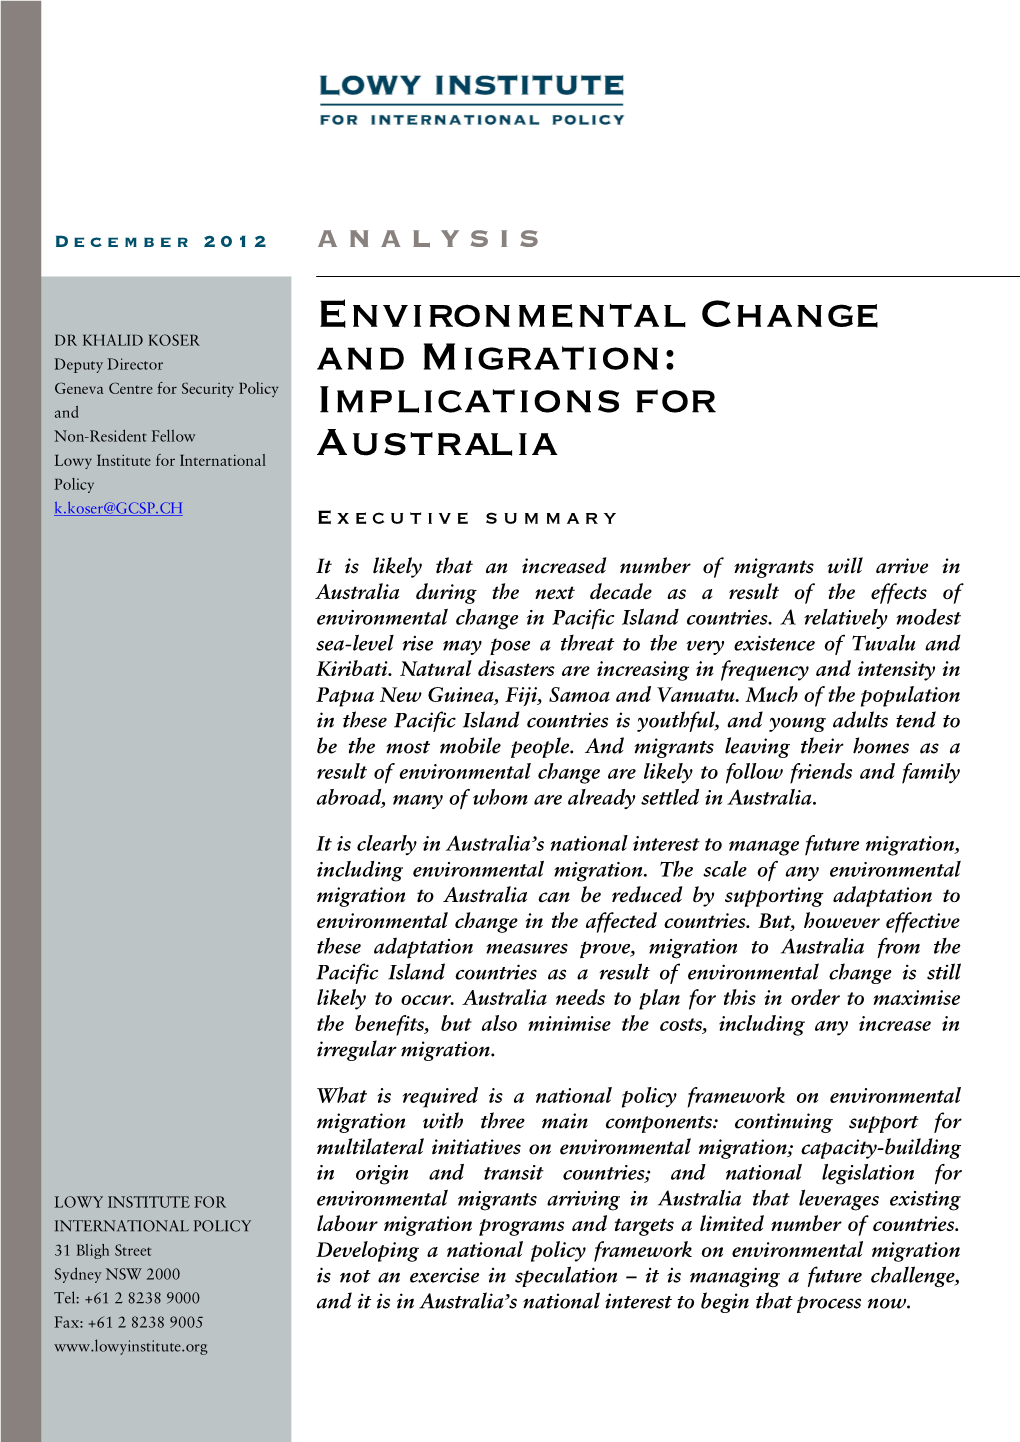 Environmental Change and Migration: Implications for Australia